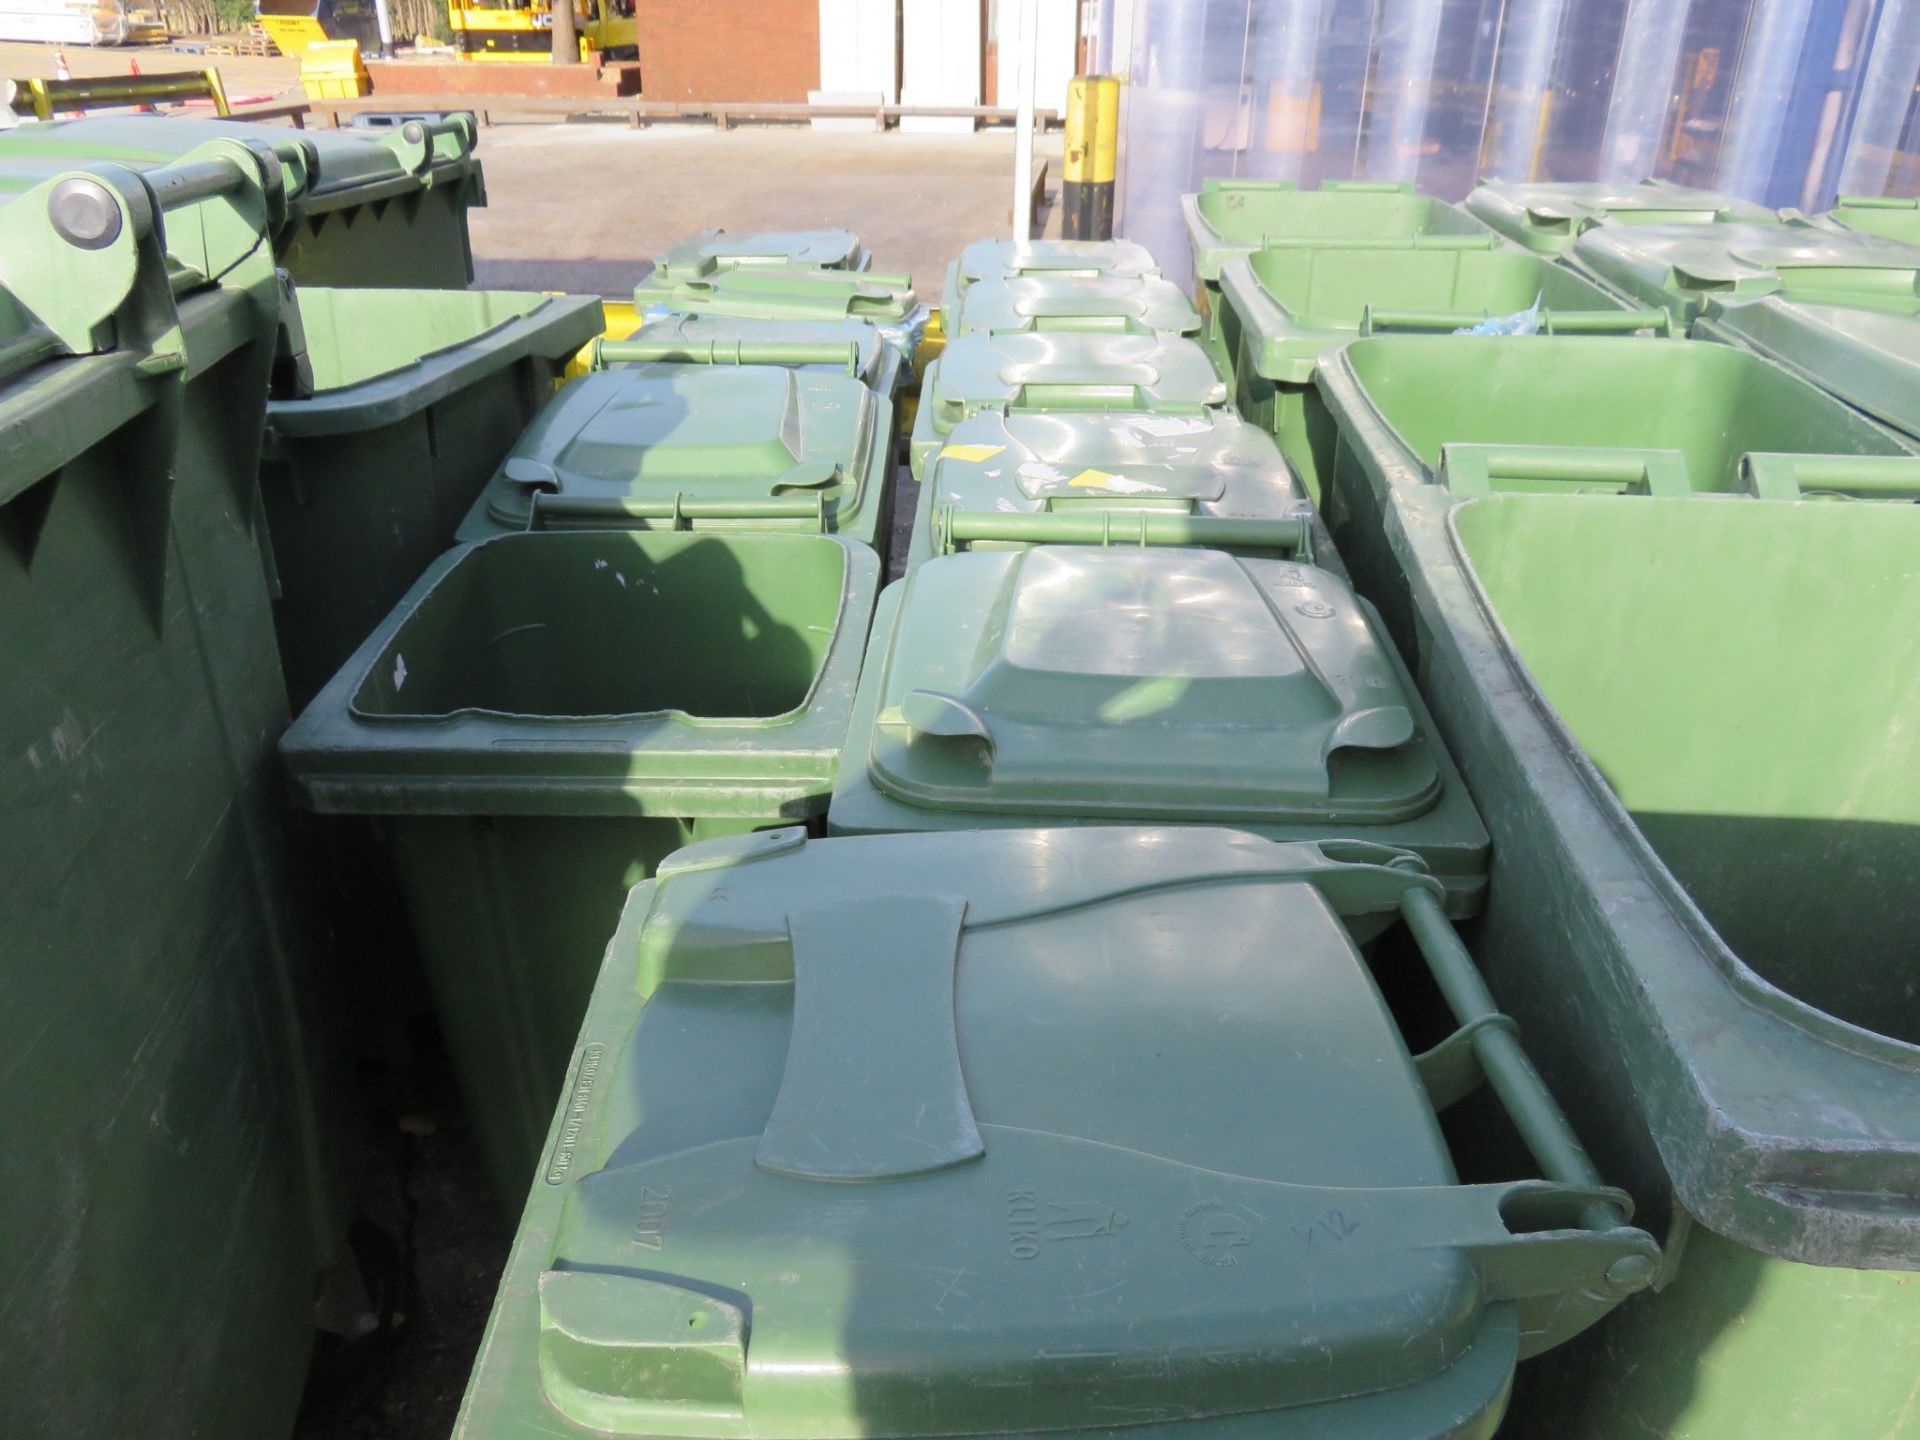 x 4 Green Wheelie Bins 2 wheels by Kilco some with lids. Approx. 400 x 400 mm. Lift out charge £5